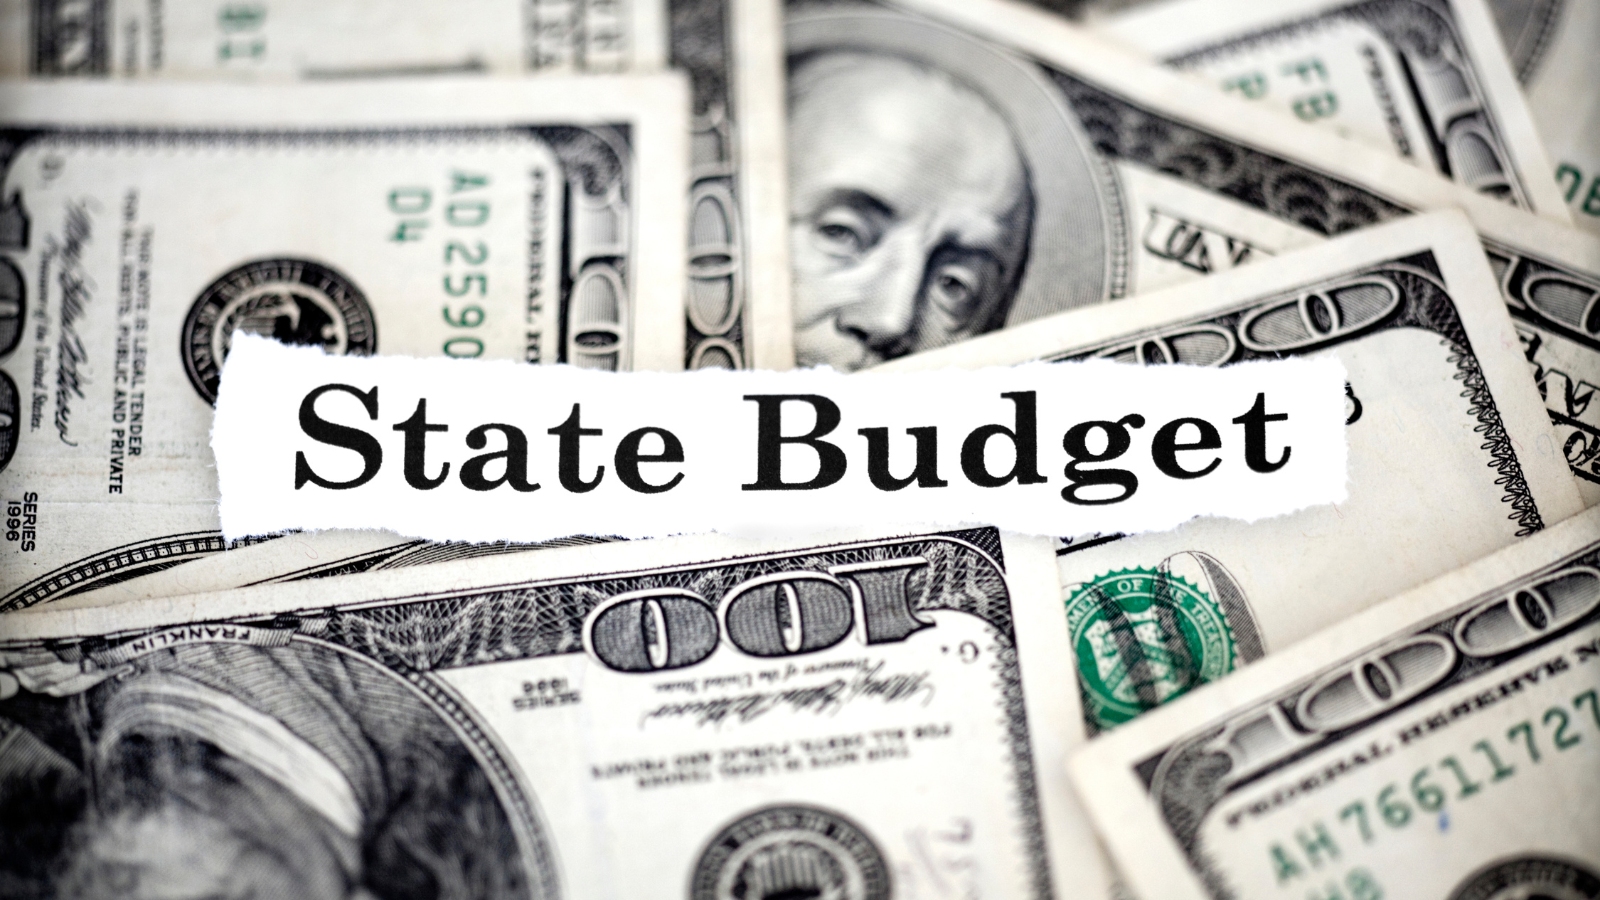 a pile of money appears in the background along with the words state budget. Text in foreground says Join us on Wednesday, Feb. 21, at 11 am